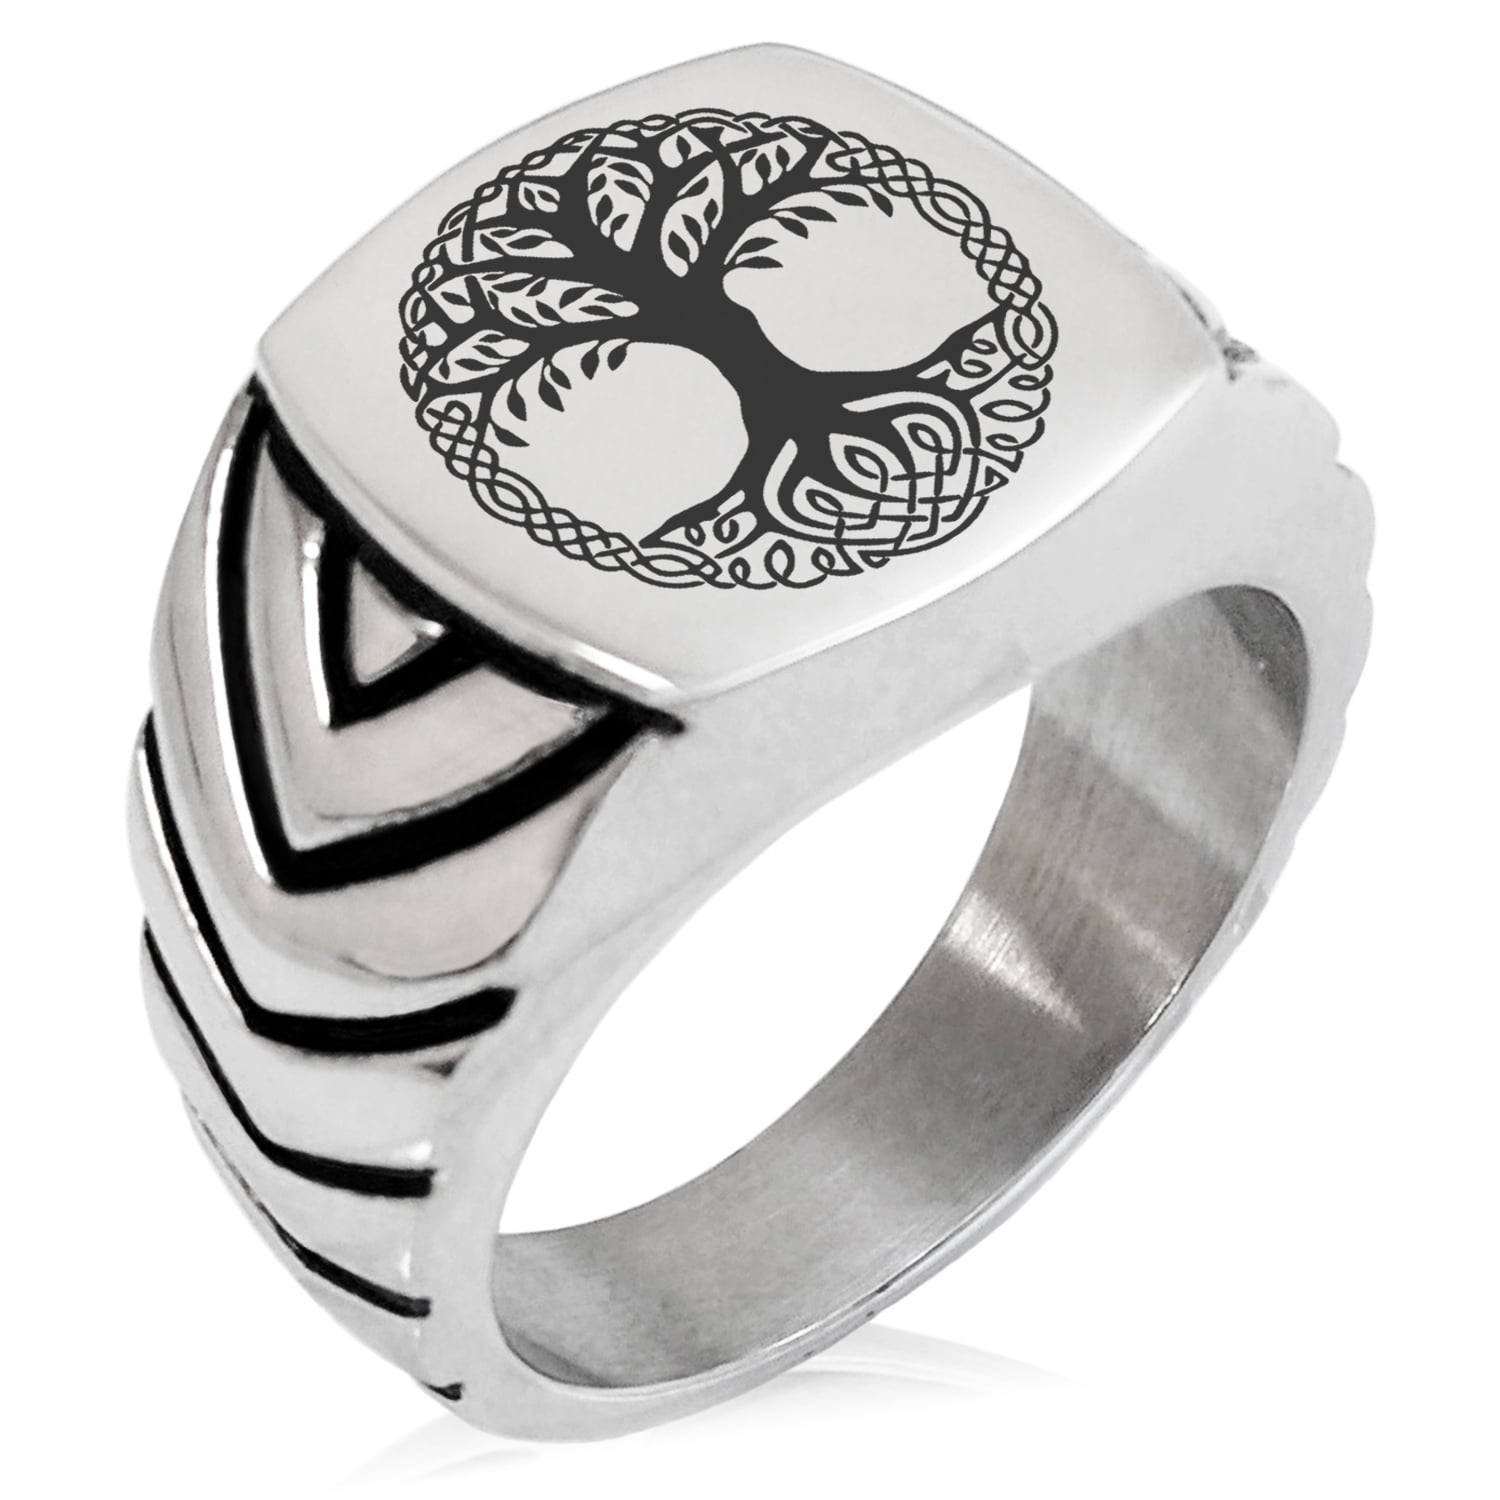 Stainless Steel Yggdrasil Great Tree of Life Viking Norse Chevron Pattern Biker Style Polished Ring